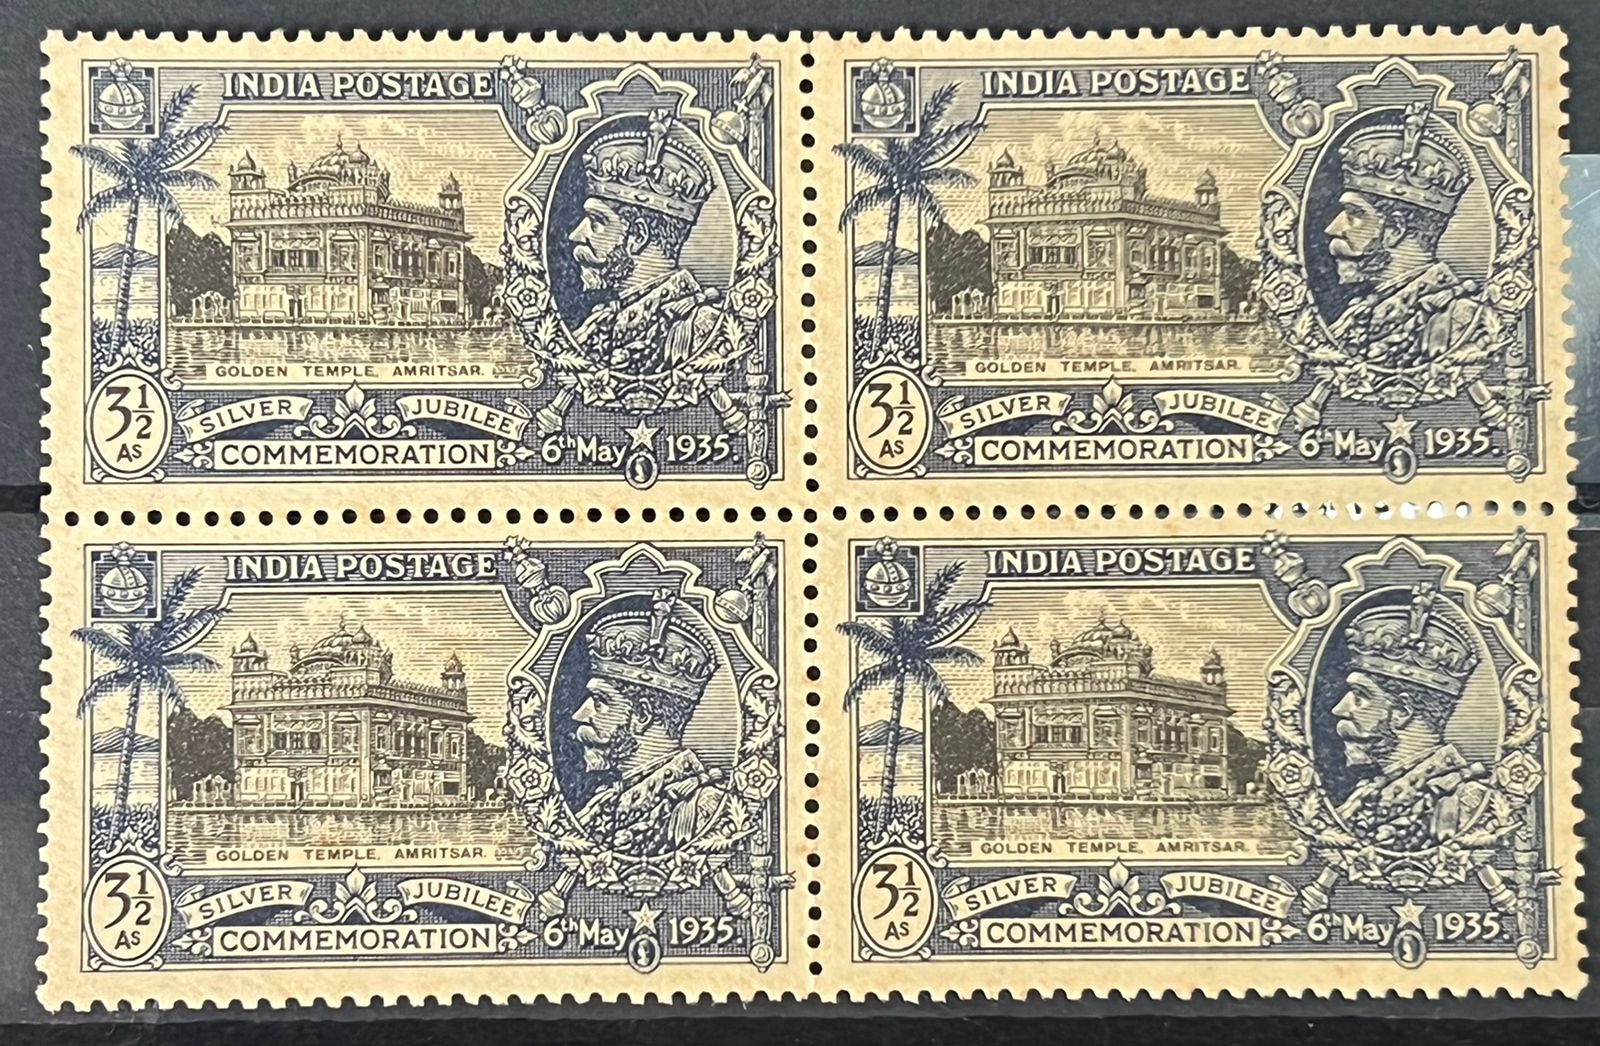 India 1935 KGV Silver Jubilee 3 1/2as Golden Temple with ‘BIRD FLAW’ Variety SG 245a Mint Block of 4 MNH Toned Gum Cat Val £400